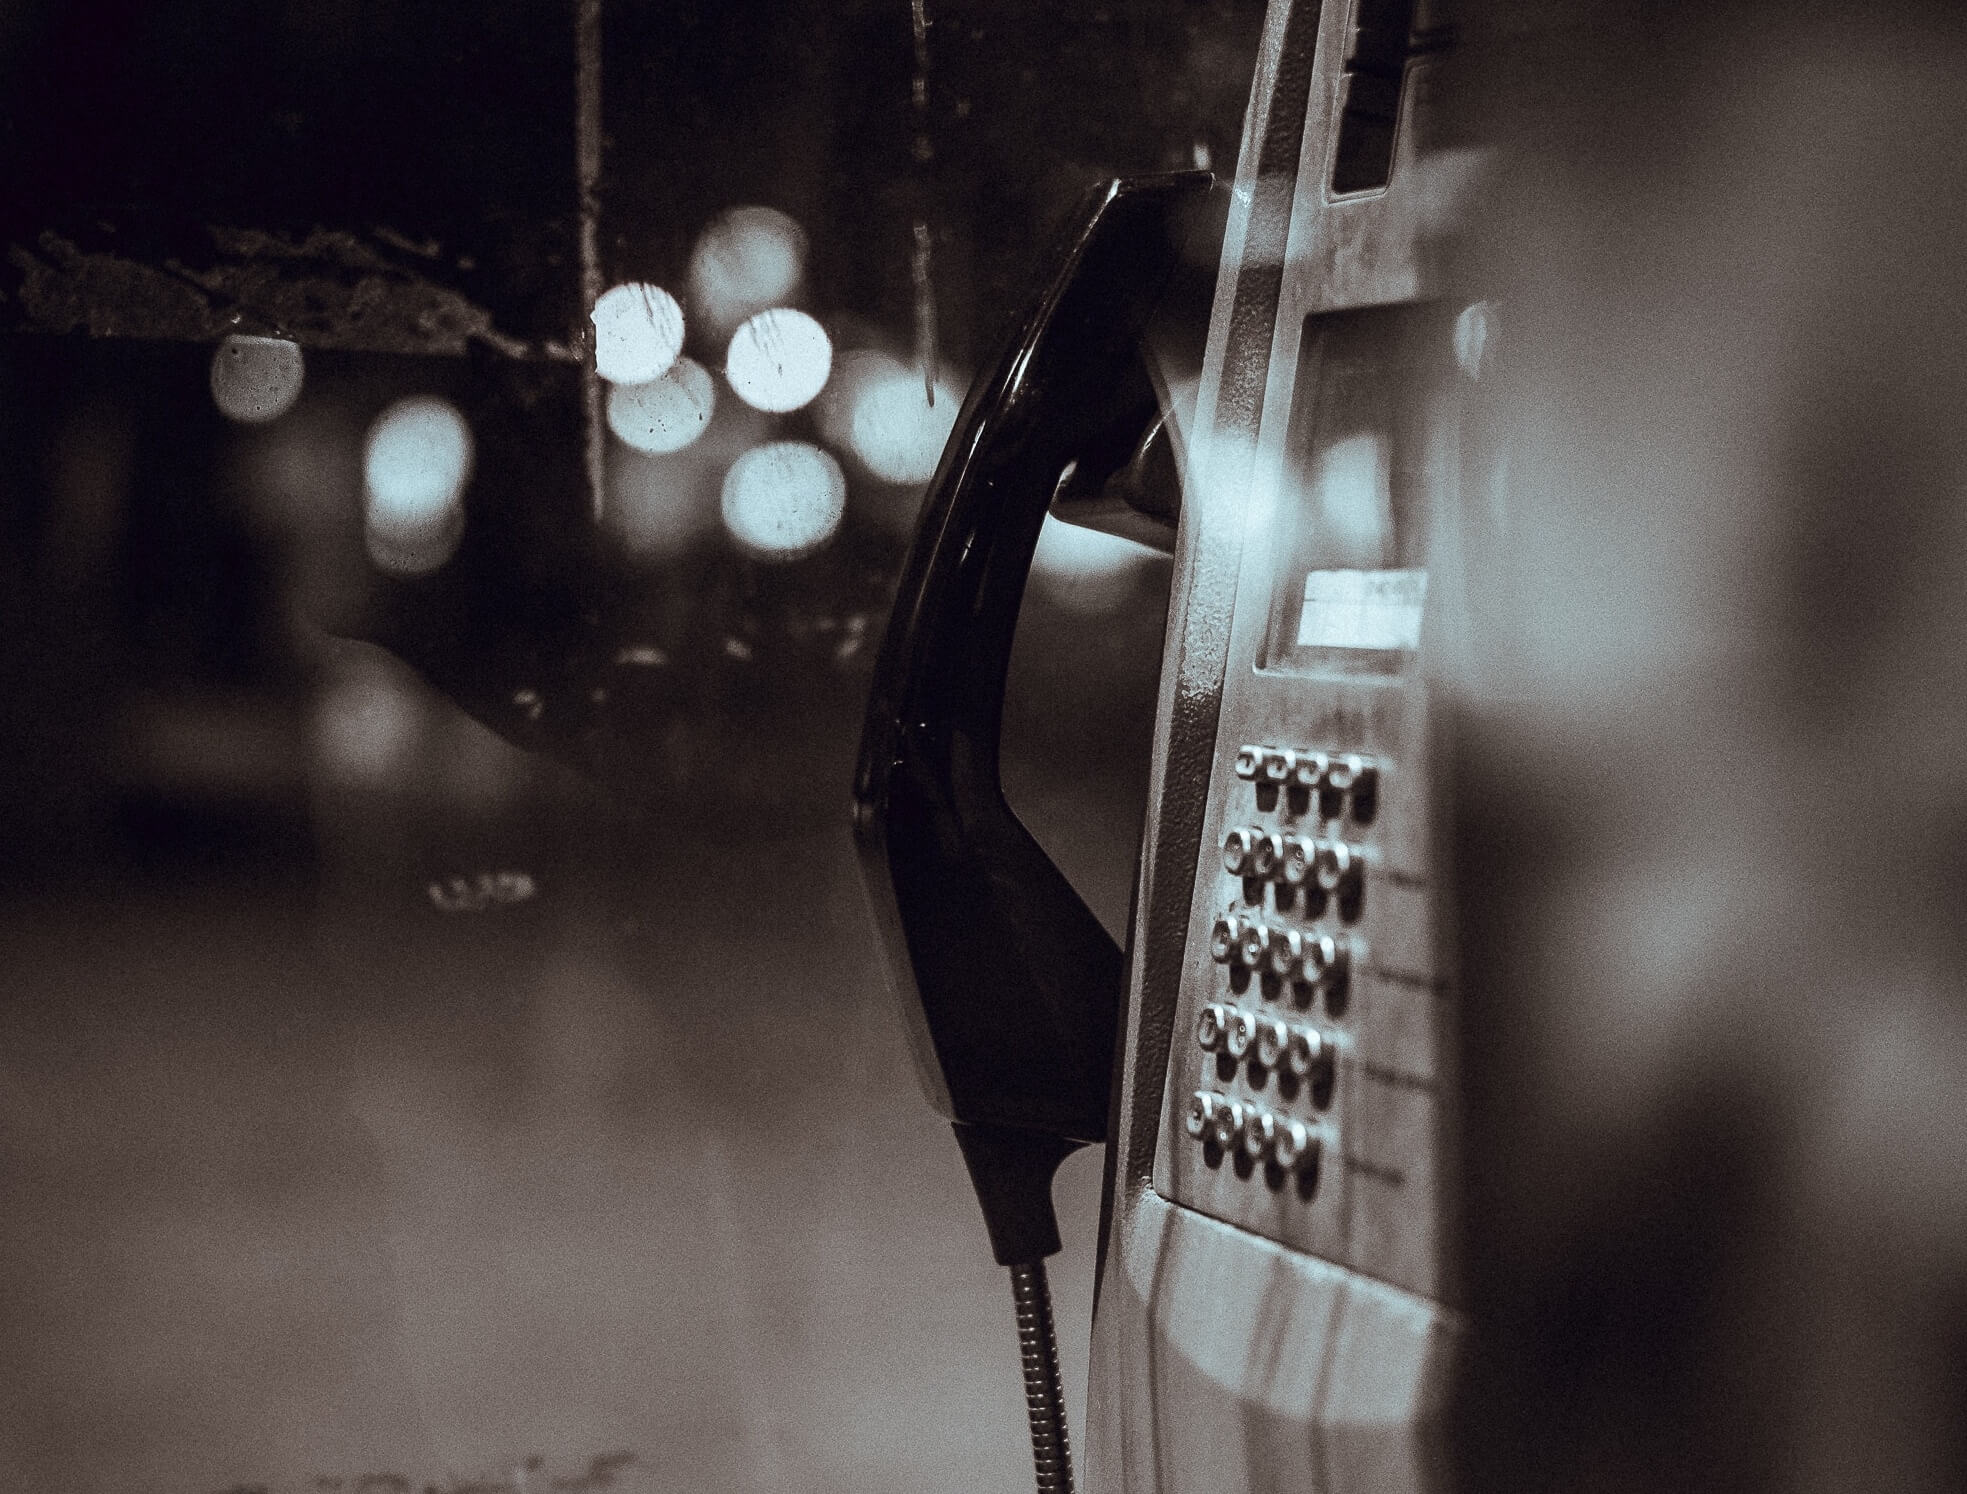 Black and white image of telephone outside in the dark